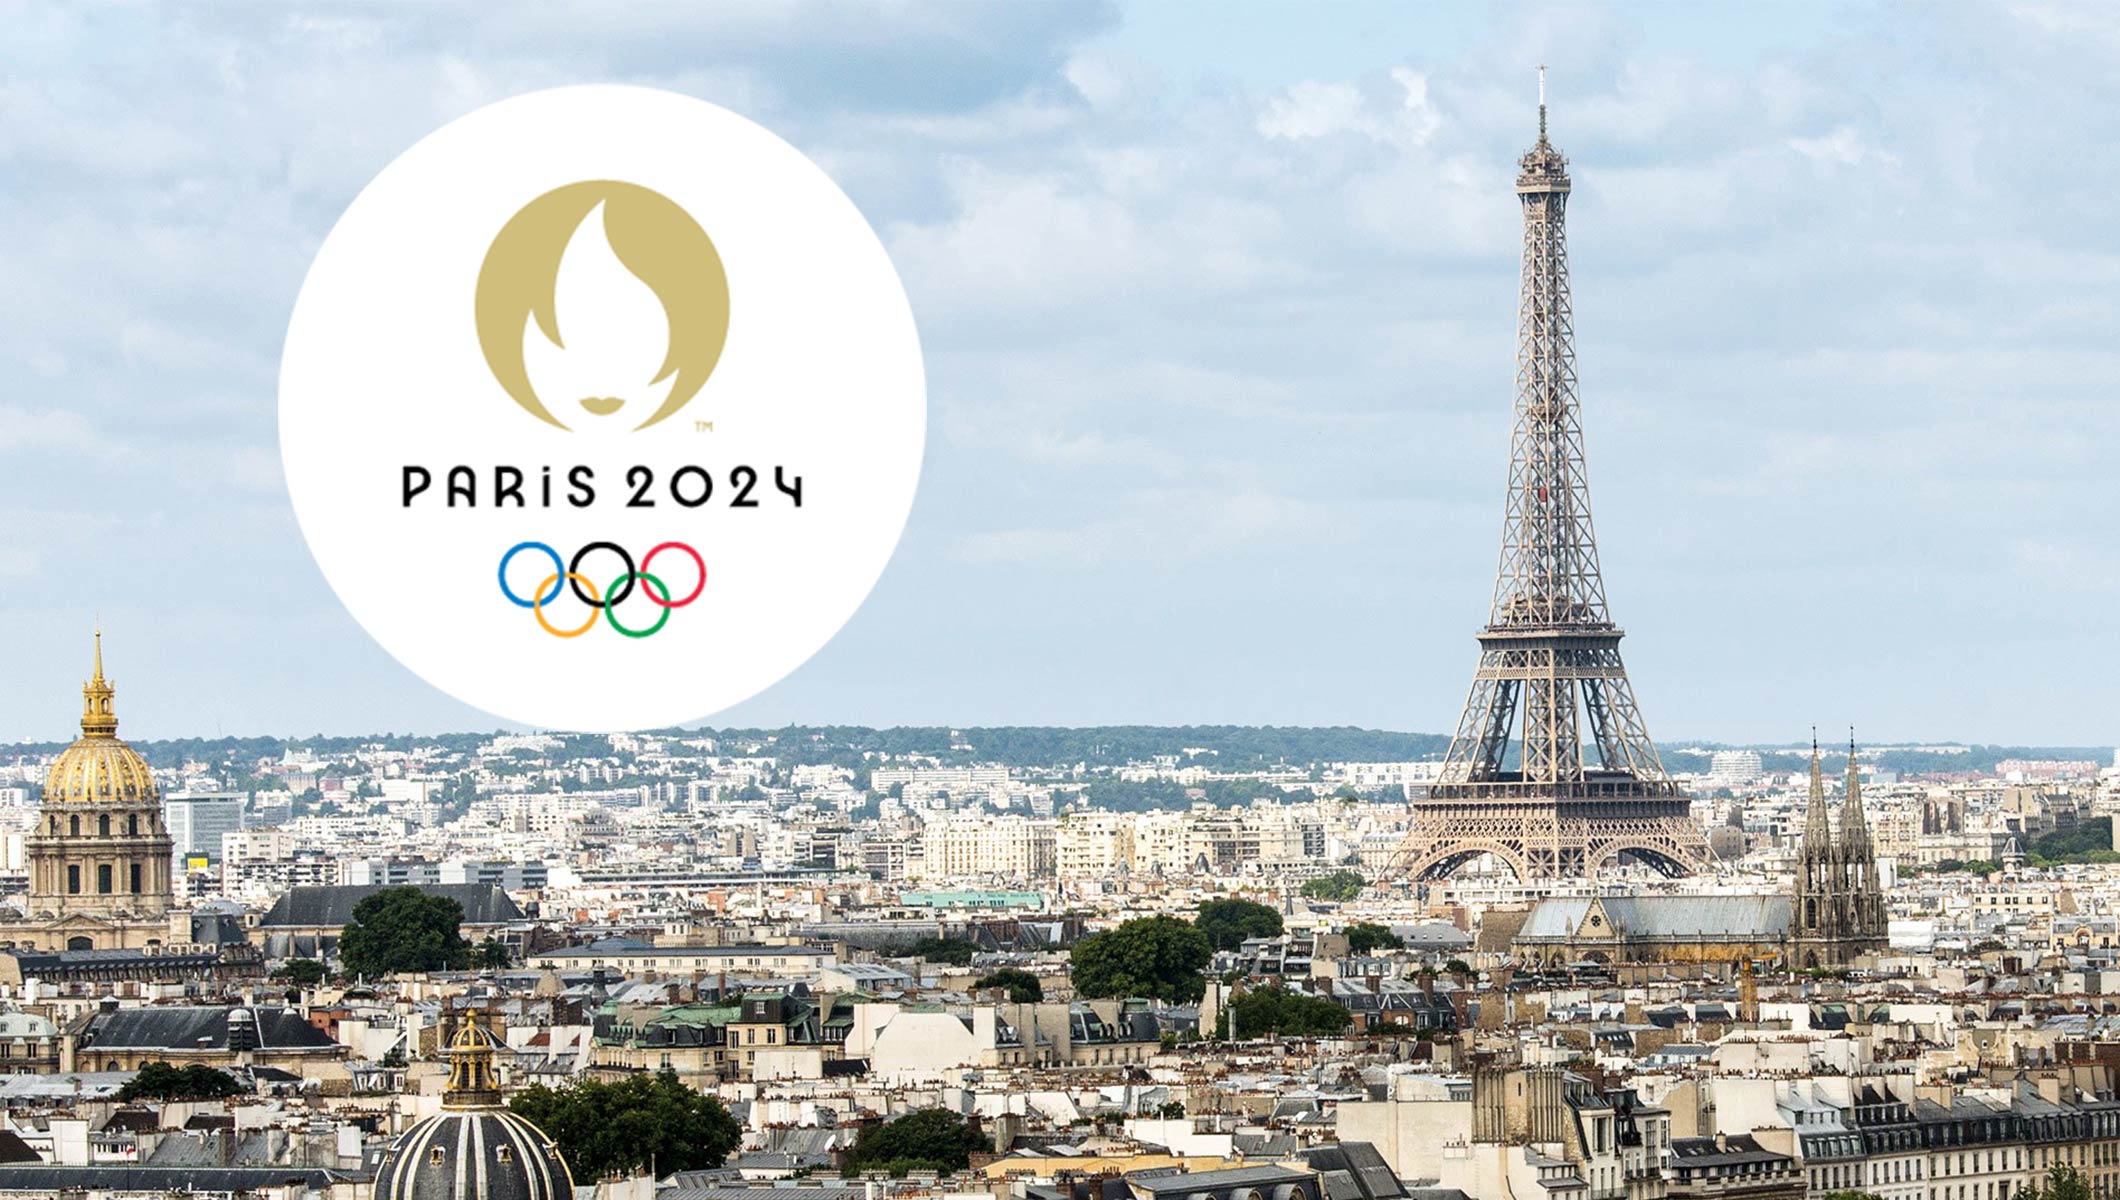 Its Official Kiteboarding In The Olympic Games Paris 2024 Features Free Kitesurfing